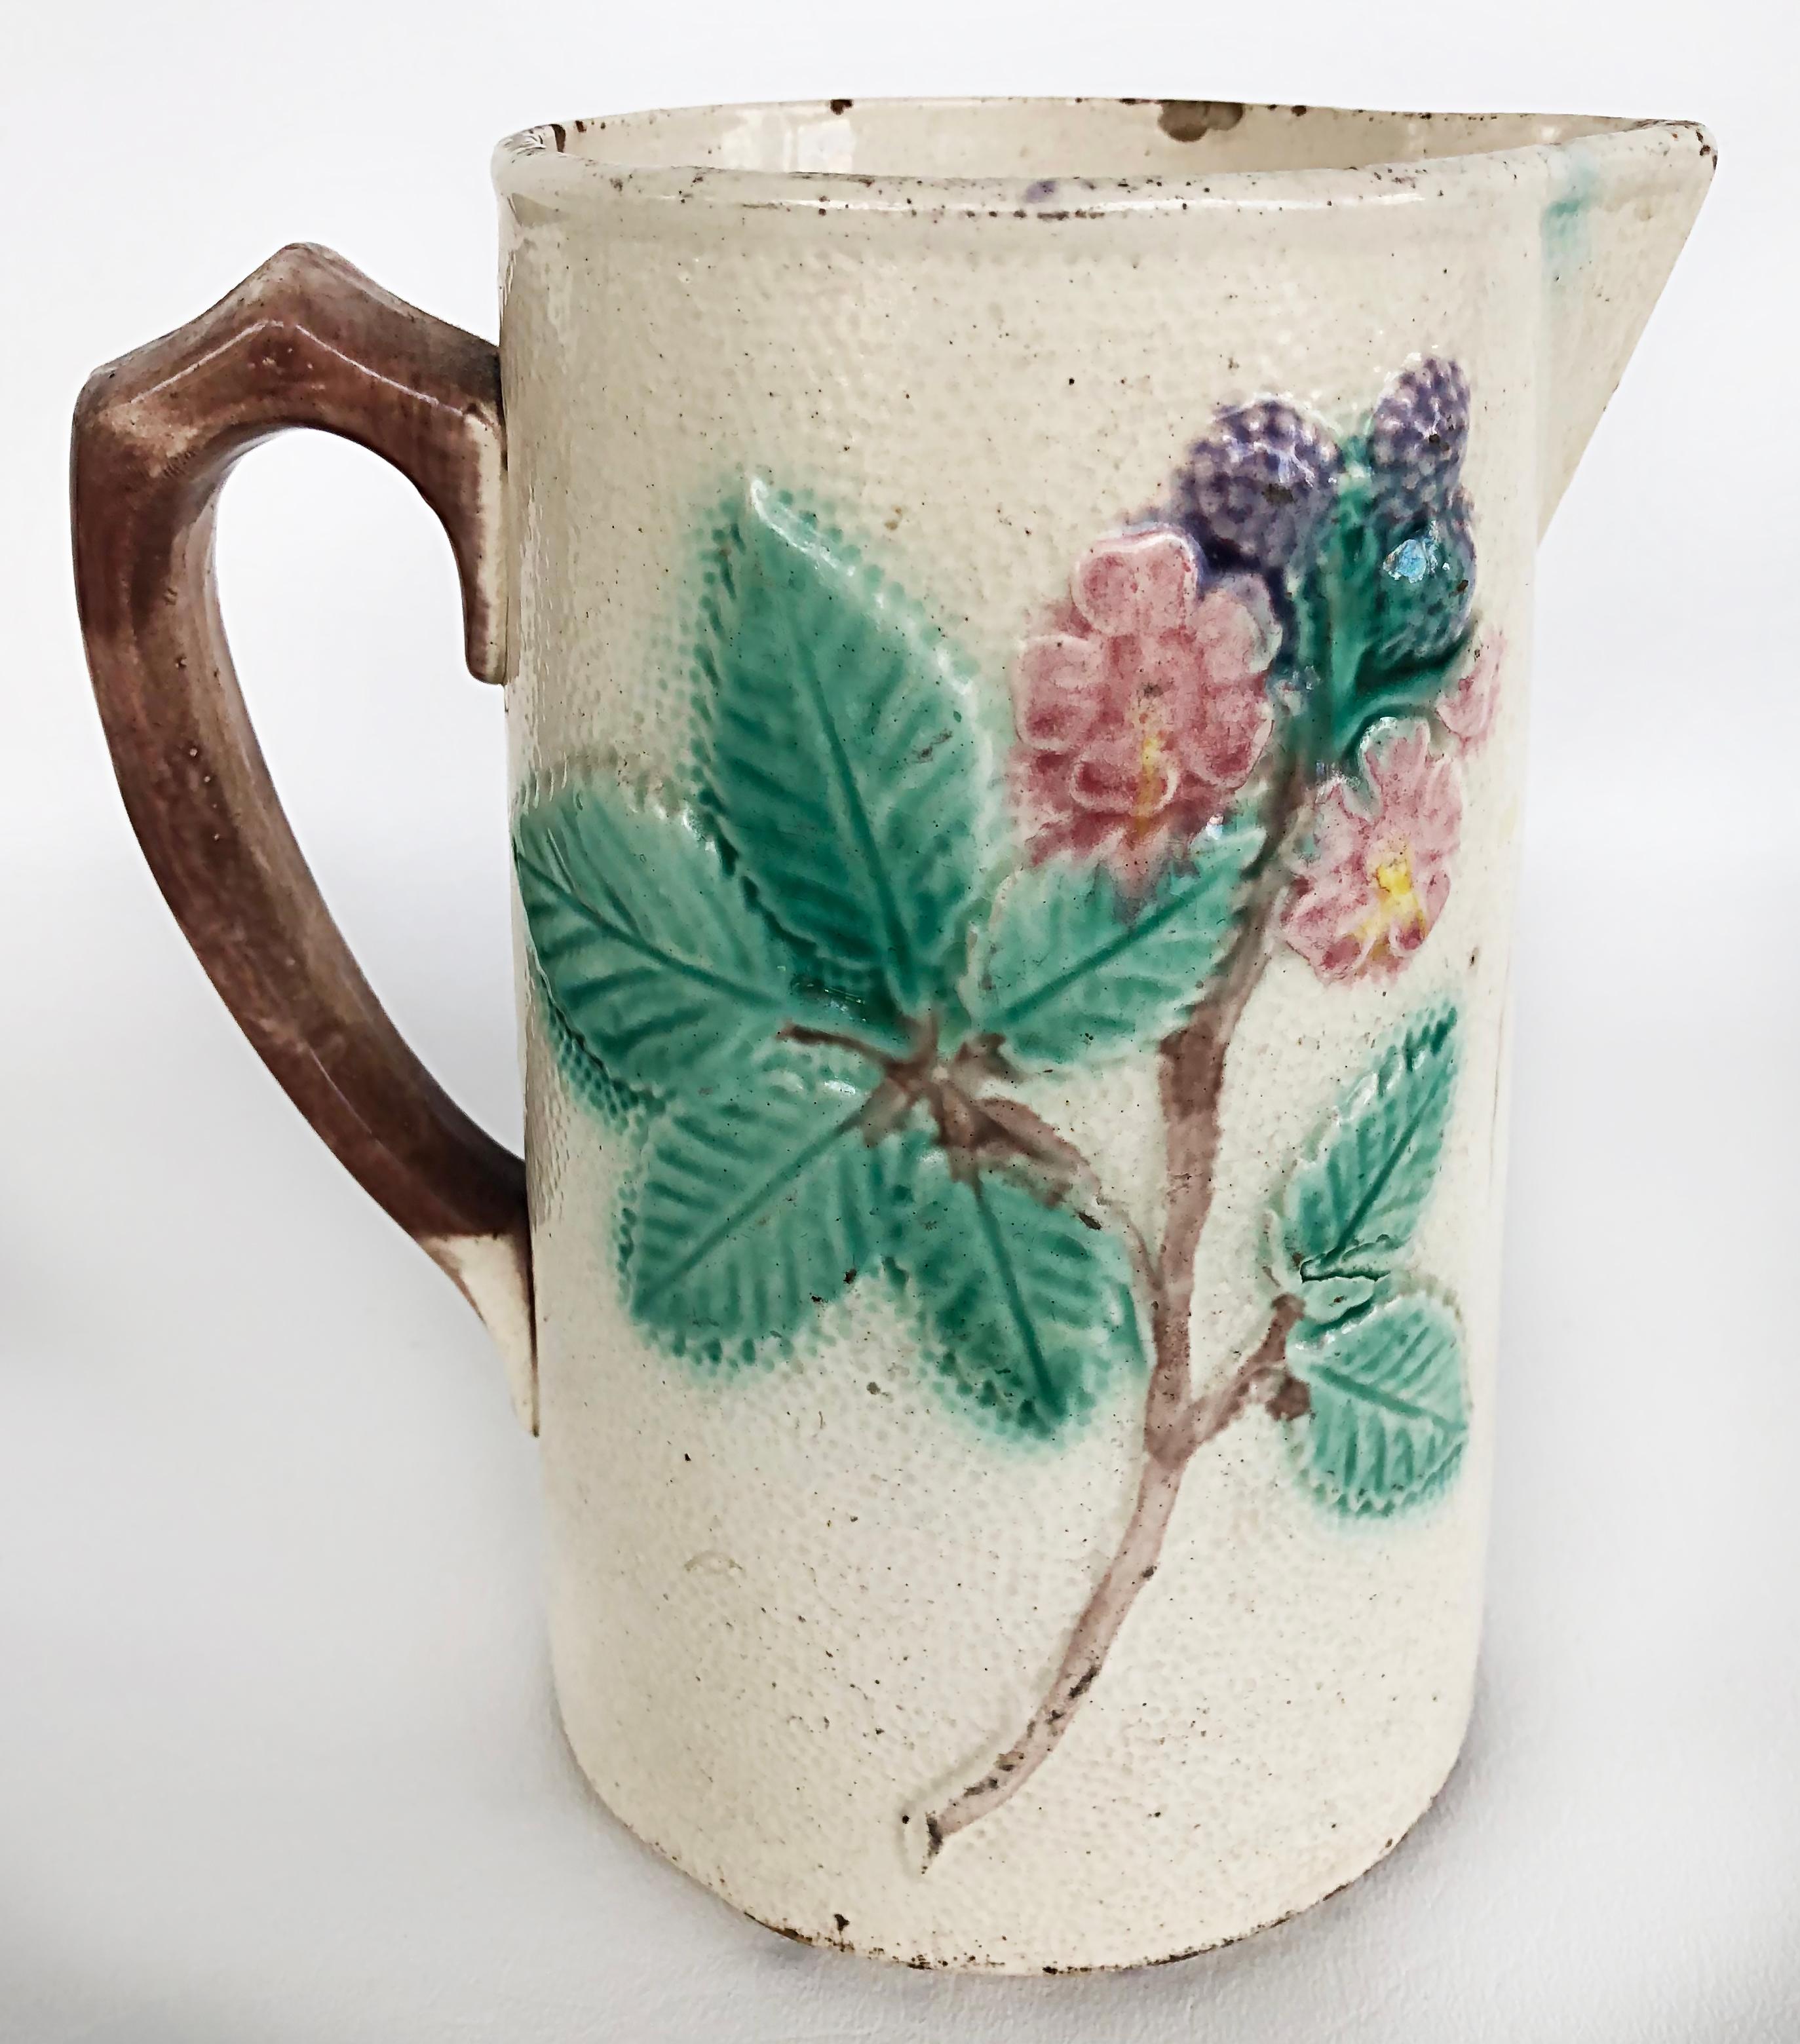 Vintage 20th century Majolica Pitcher with Floral Leaf Designs and berries.

Offered for sale is a late 20th-century majolica pitcher with floral leaf designs and a sprig of berries. The pitcher has a faux bois branch-look handle and is marked